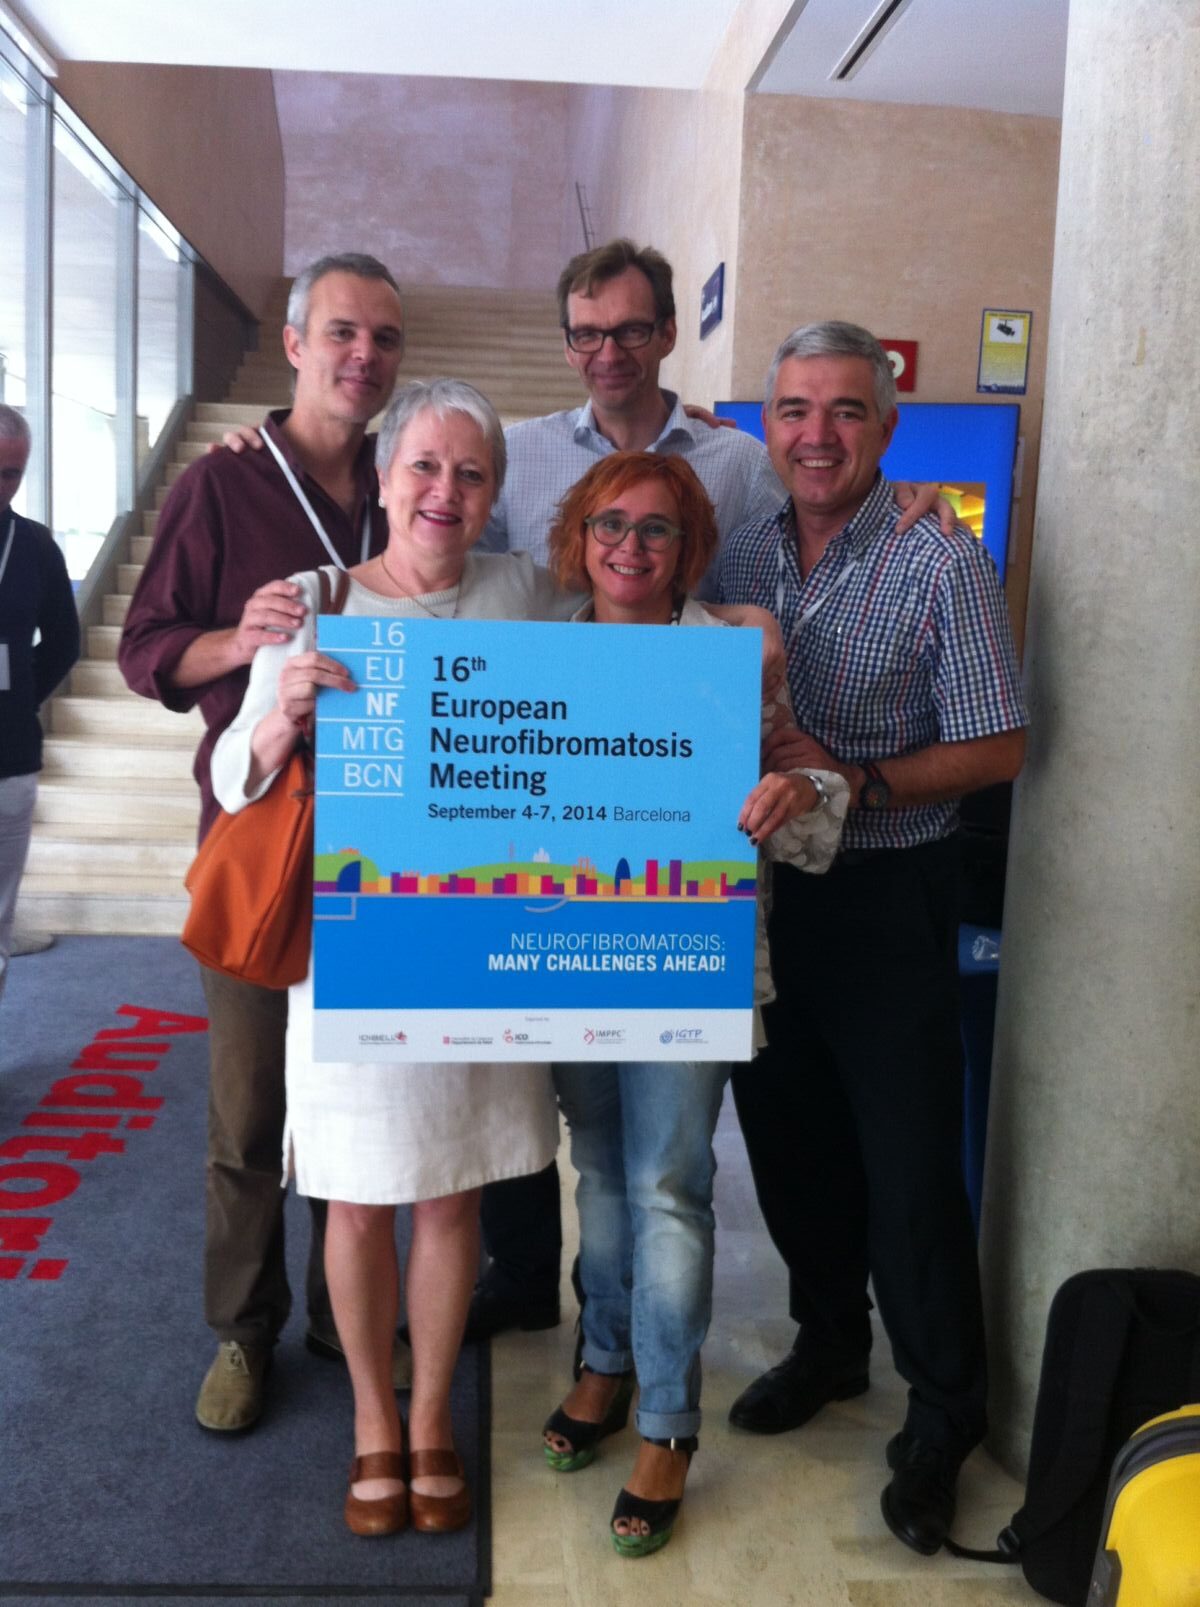 Five people standing indoors holding a sign for the 16th European Neurofibromatosis Meeting held in Barcelona from September 4-7, 2014.